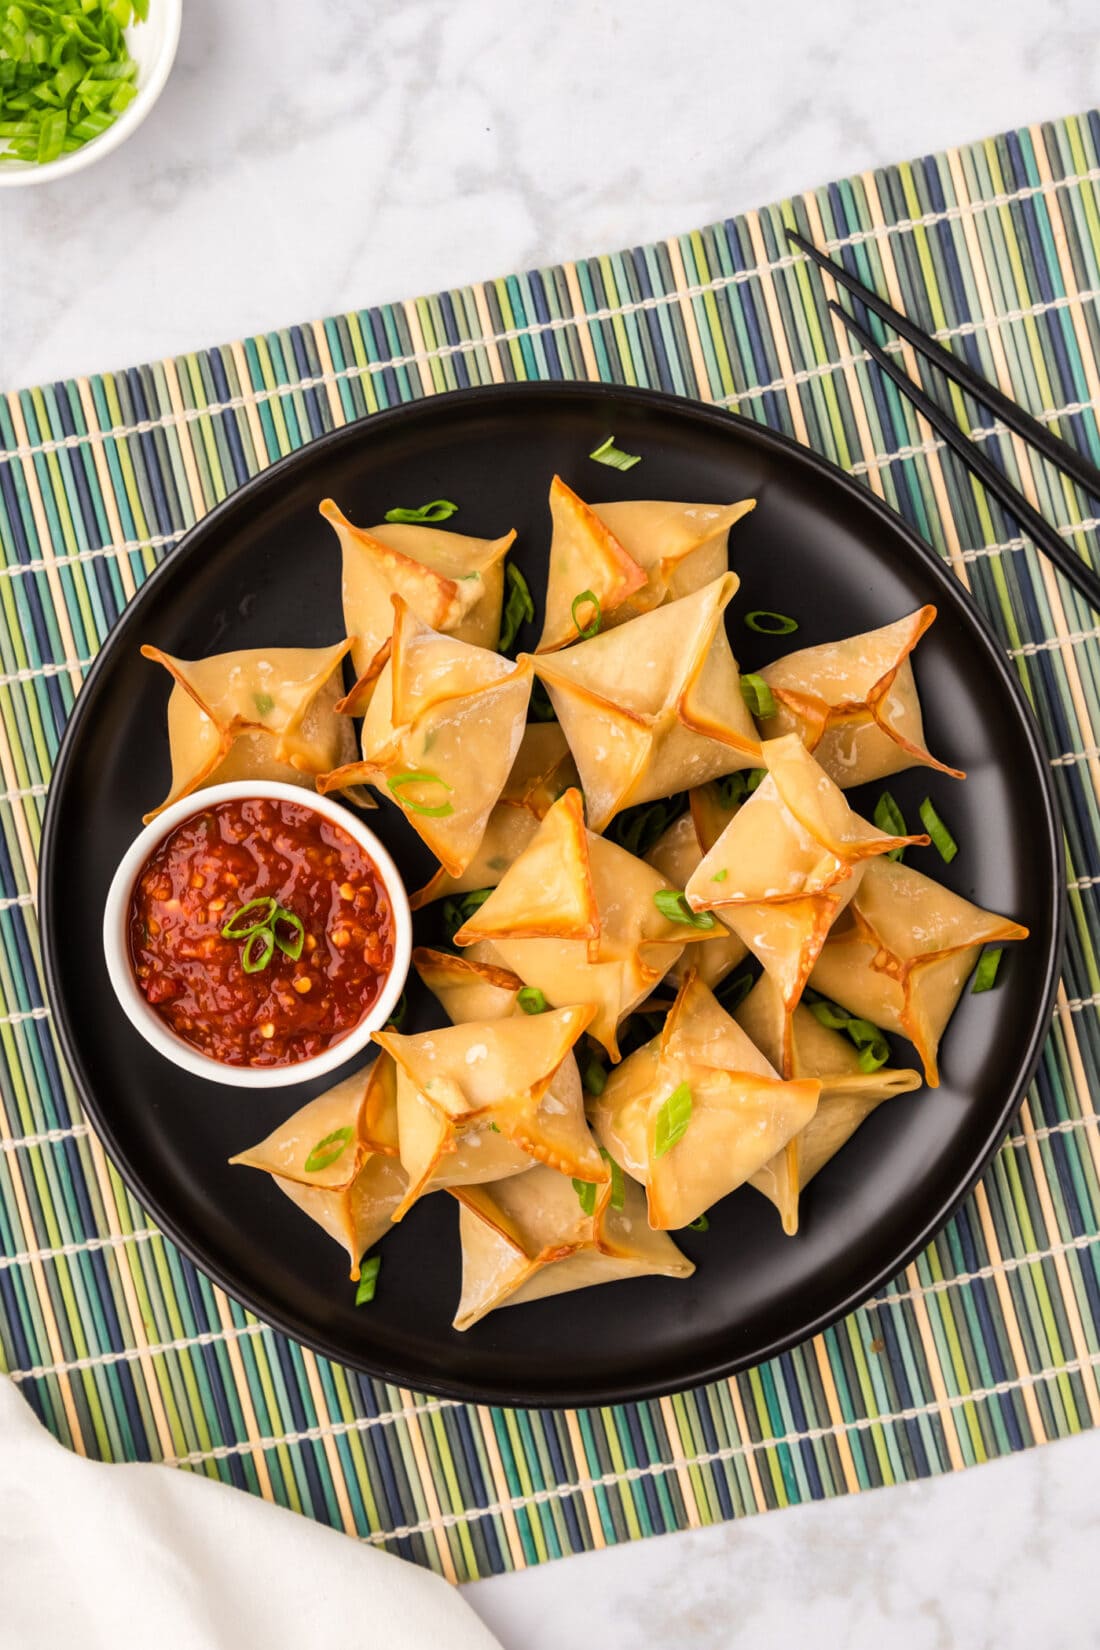 Overhead photo of a plate of Crab Rangoons